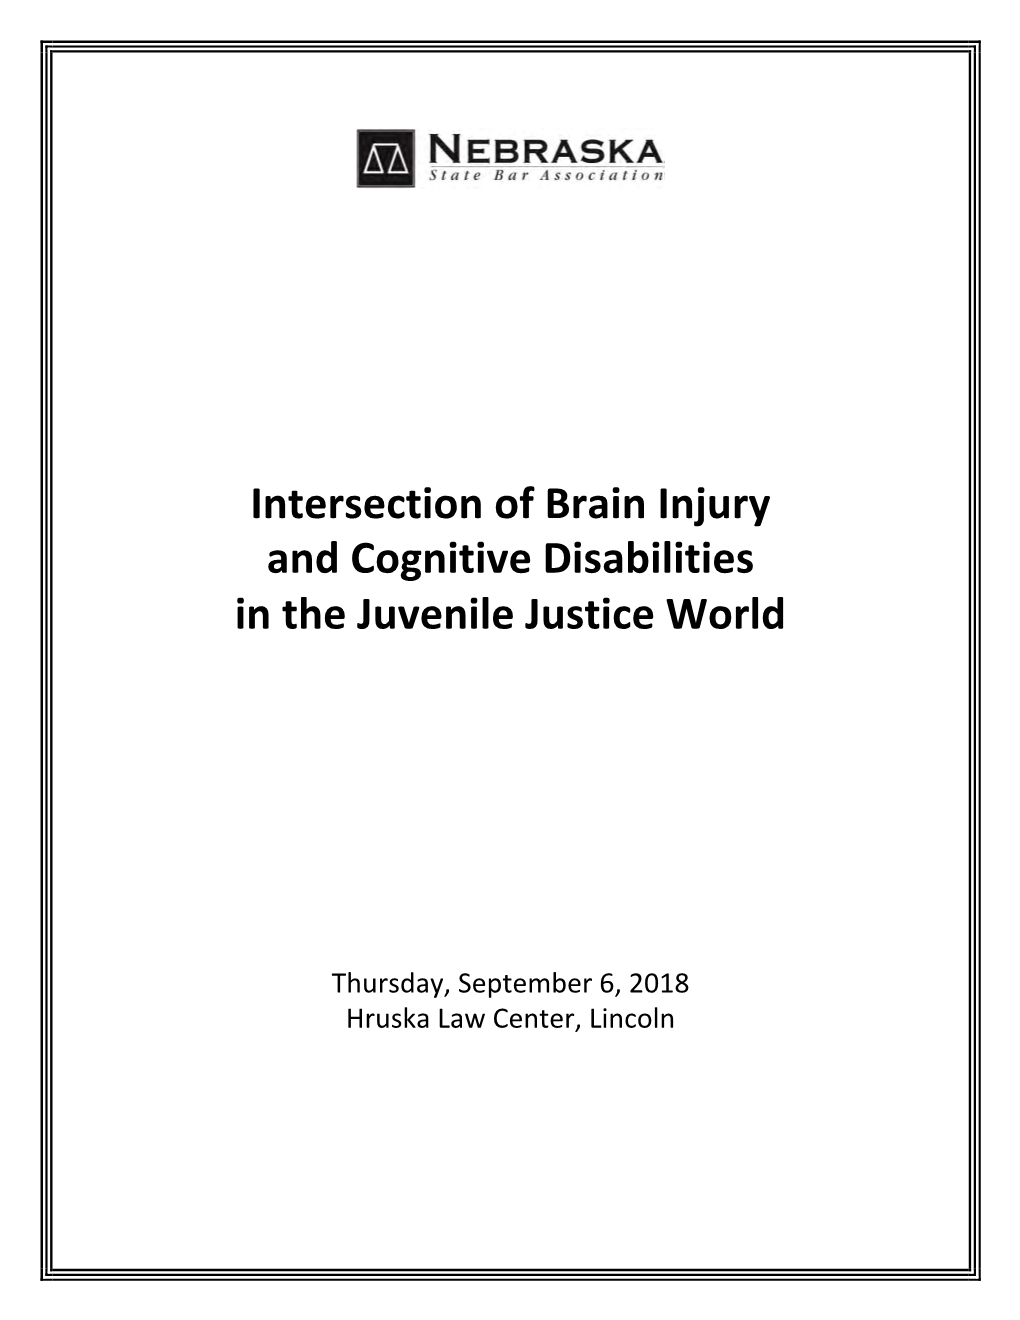 Intersection of Brain Injury and Cognitive Disabilities in the Juvenile Justice World